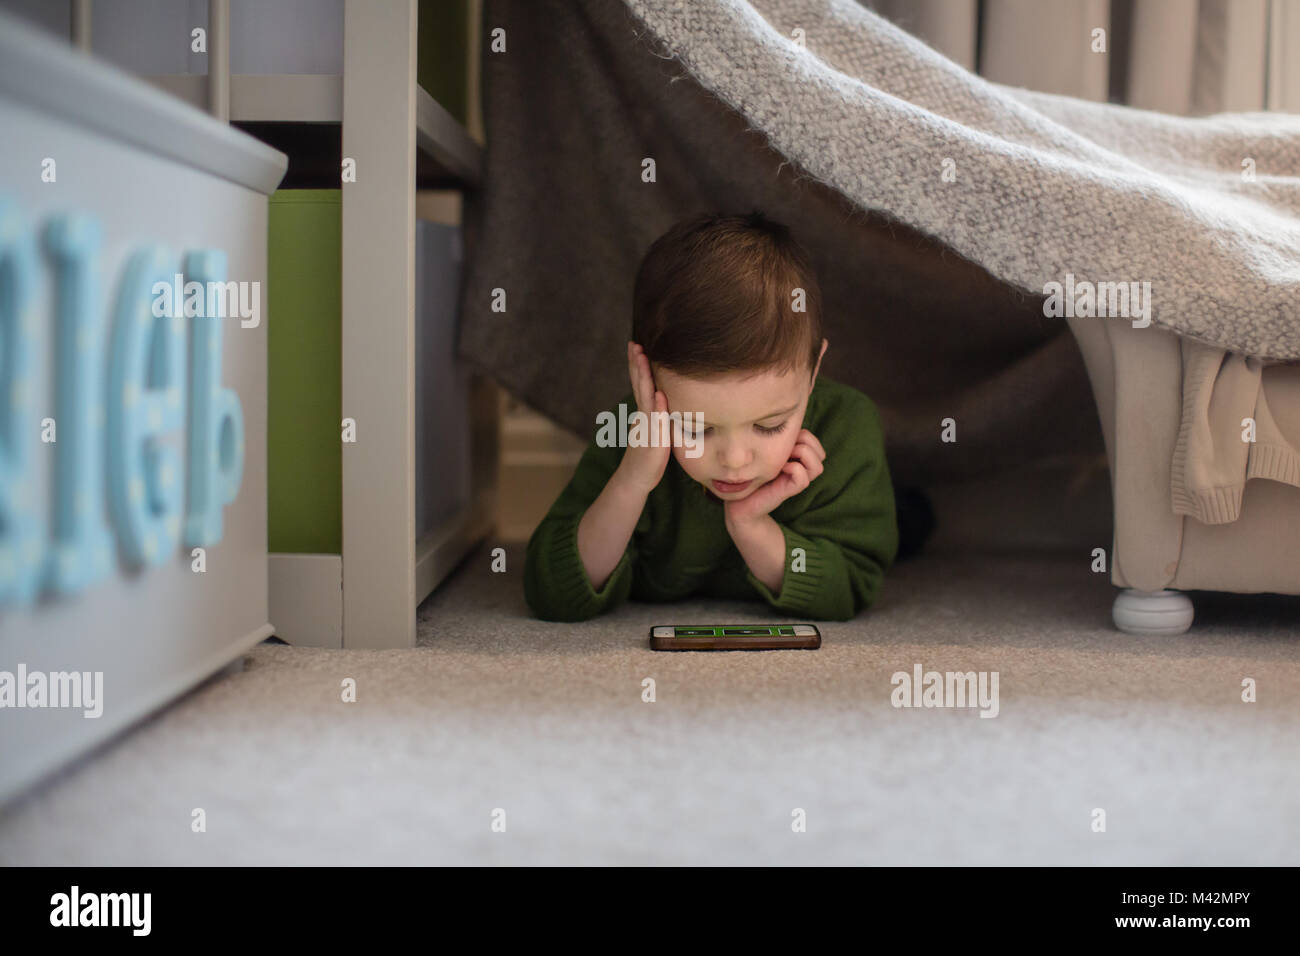 Preschool boy playing with smartphone in den Stock Photo